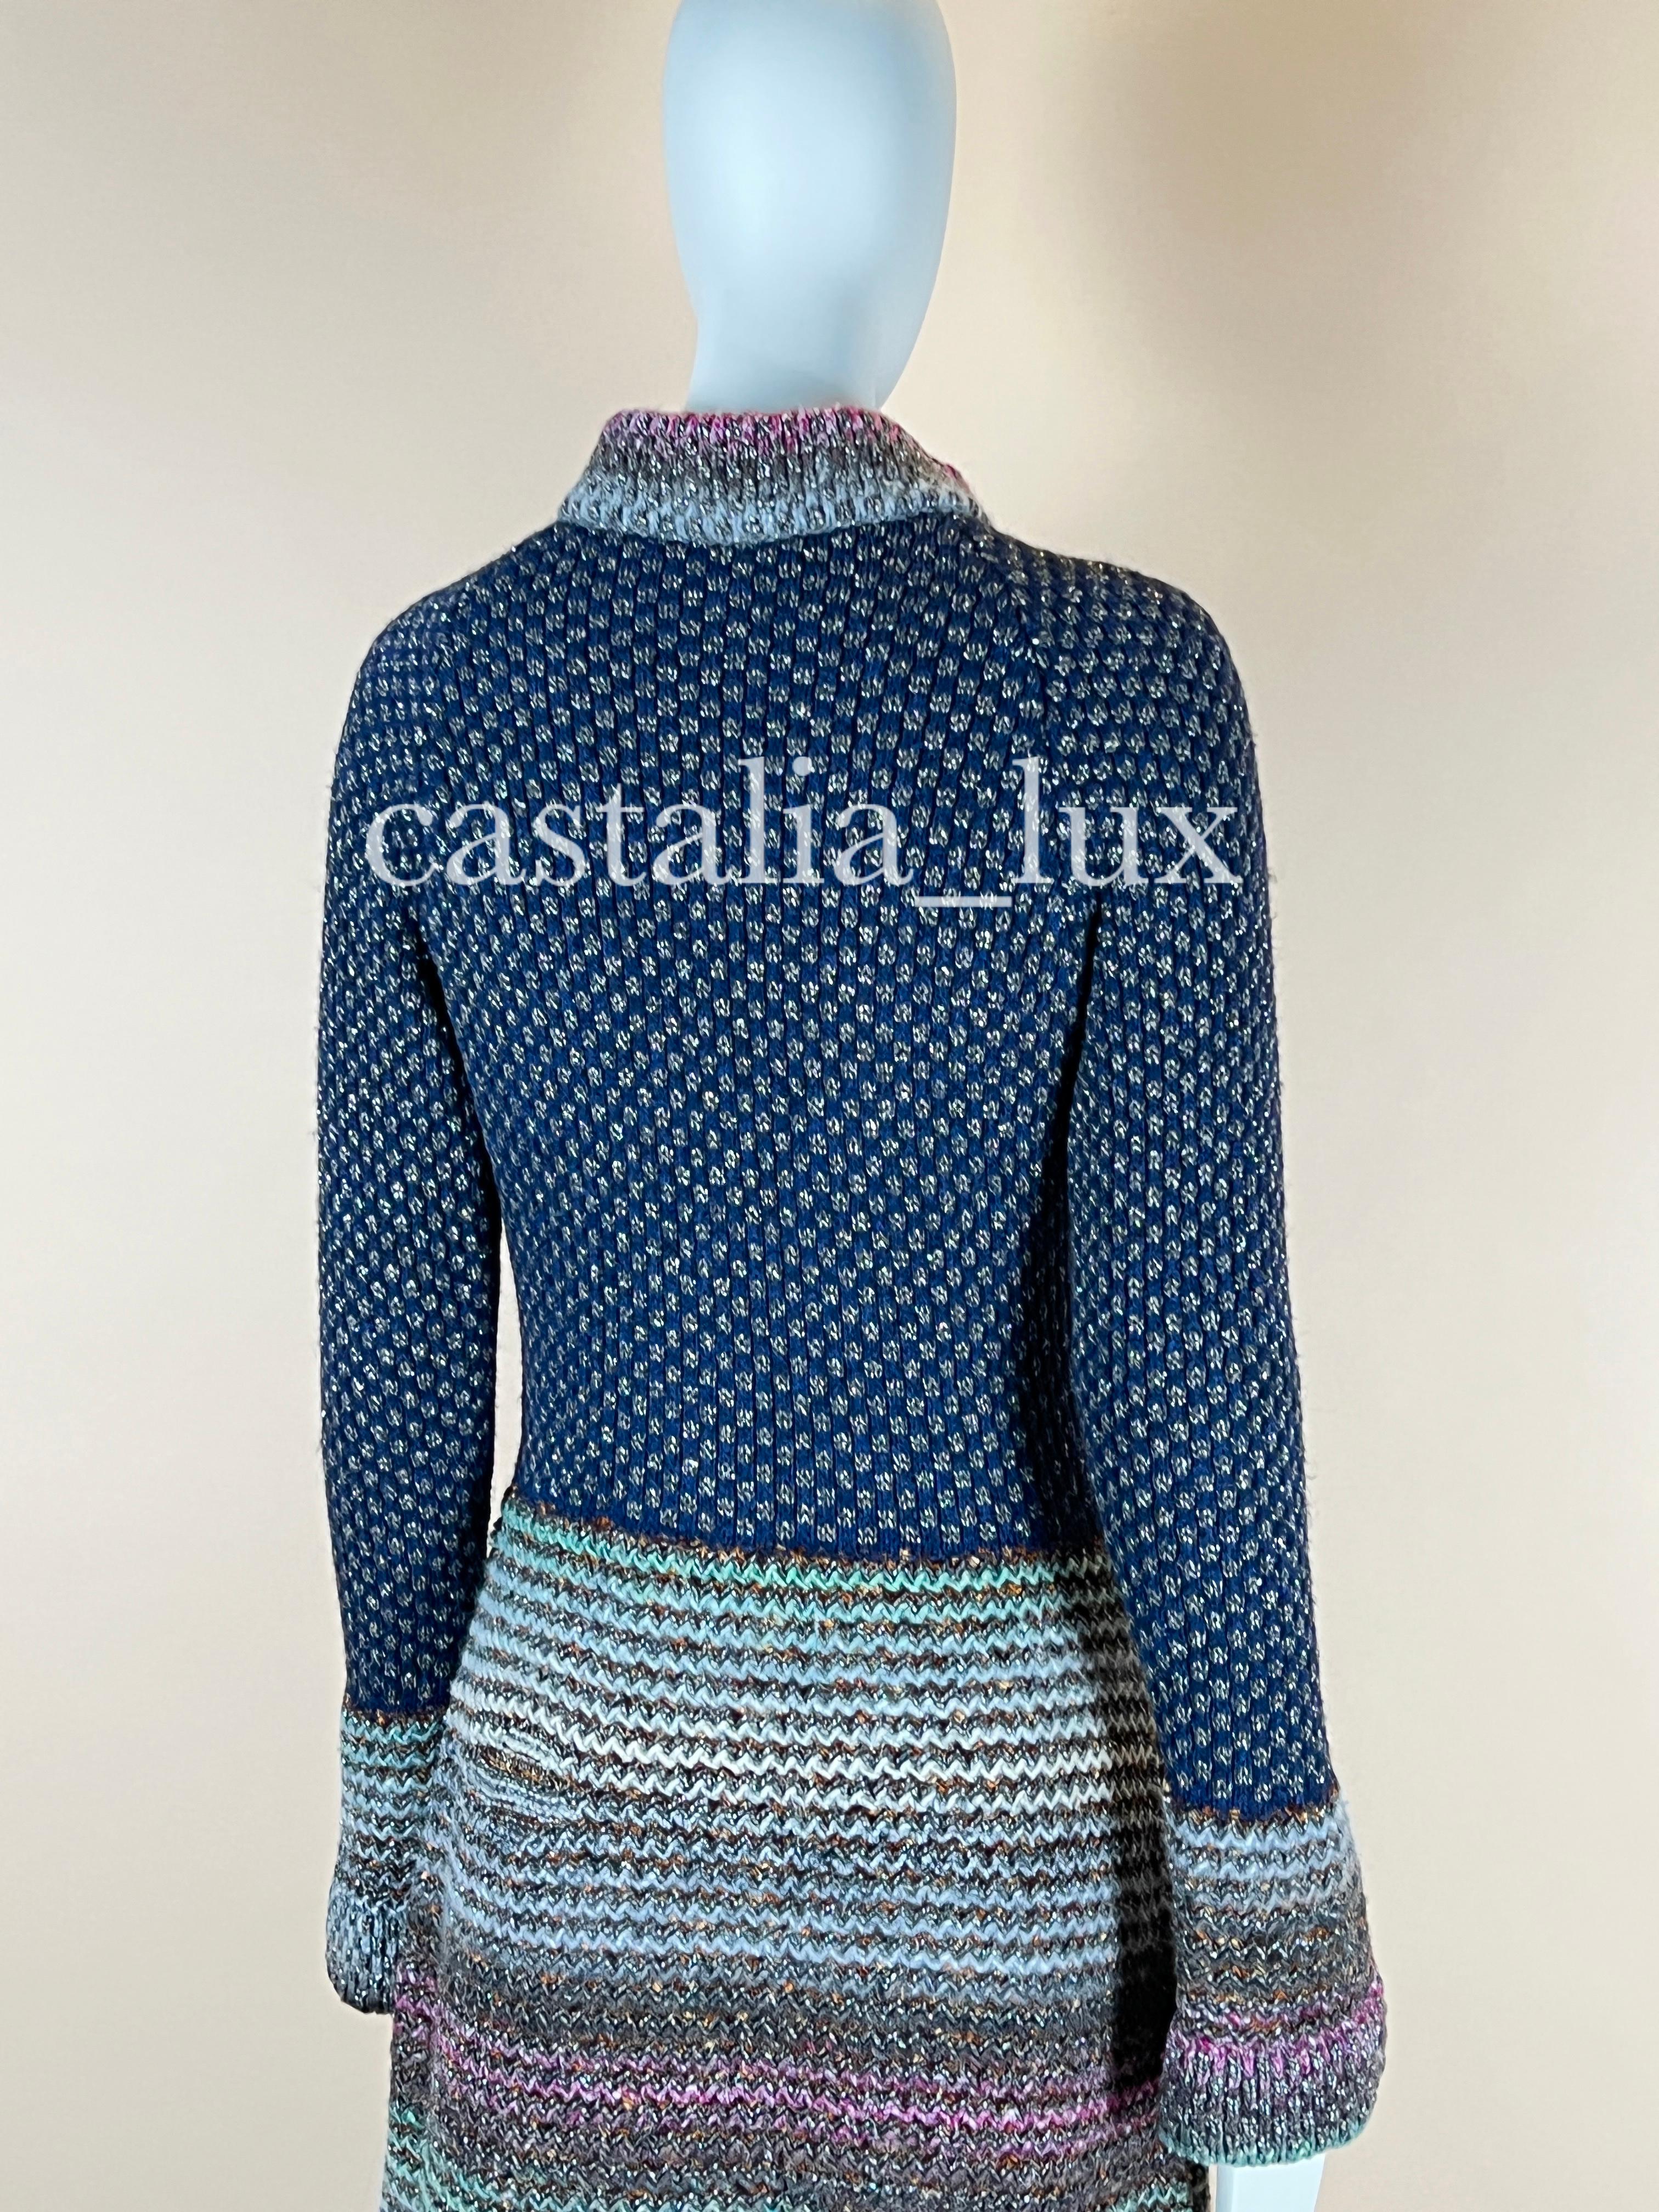 Chanel Runway Paris /BYZANCE Dress For Sale 6